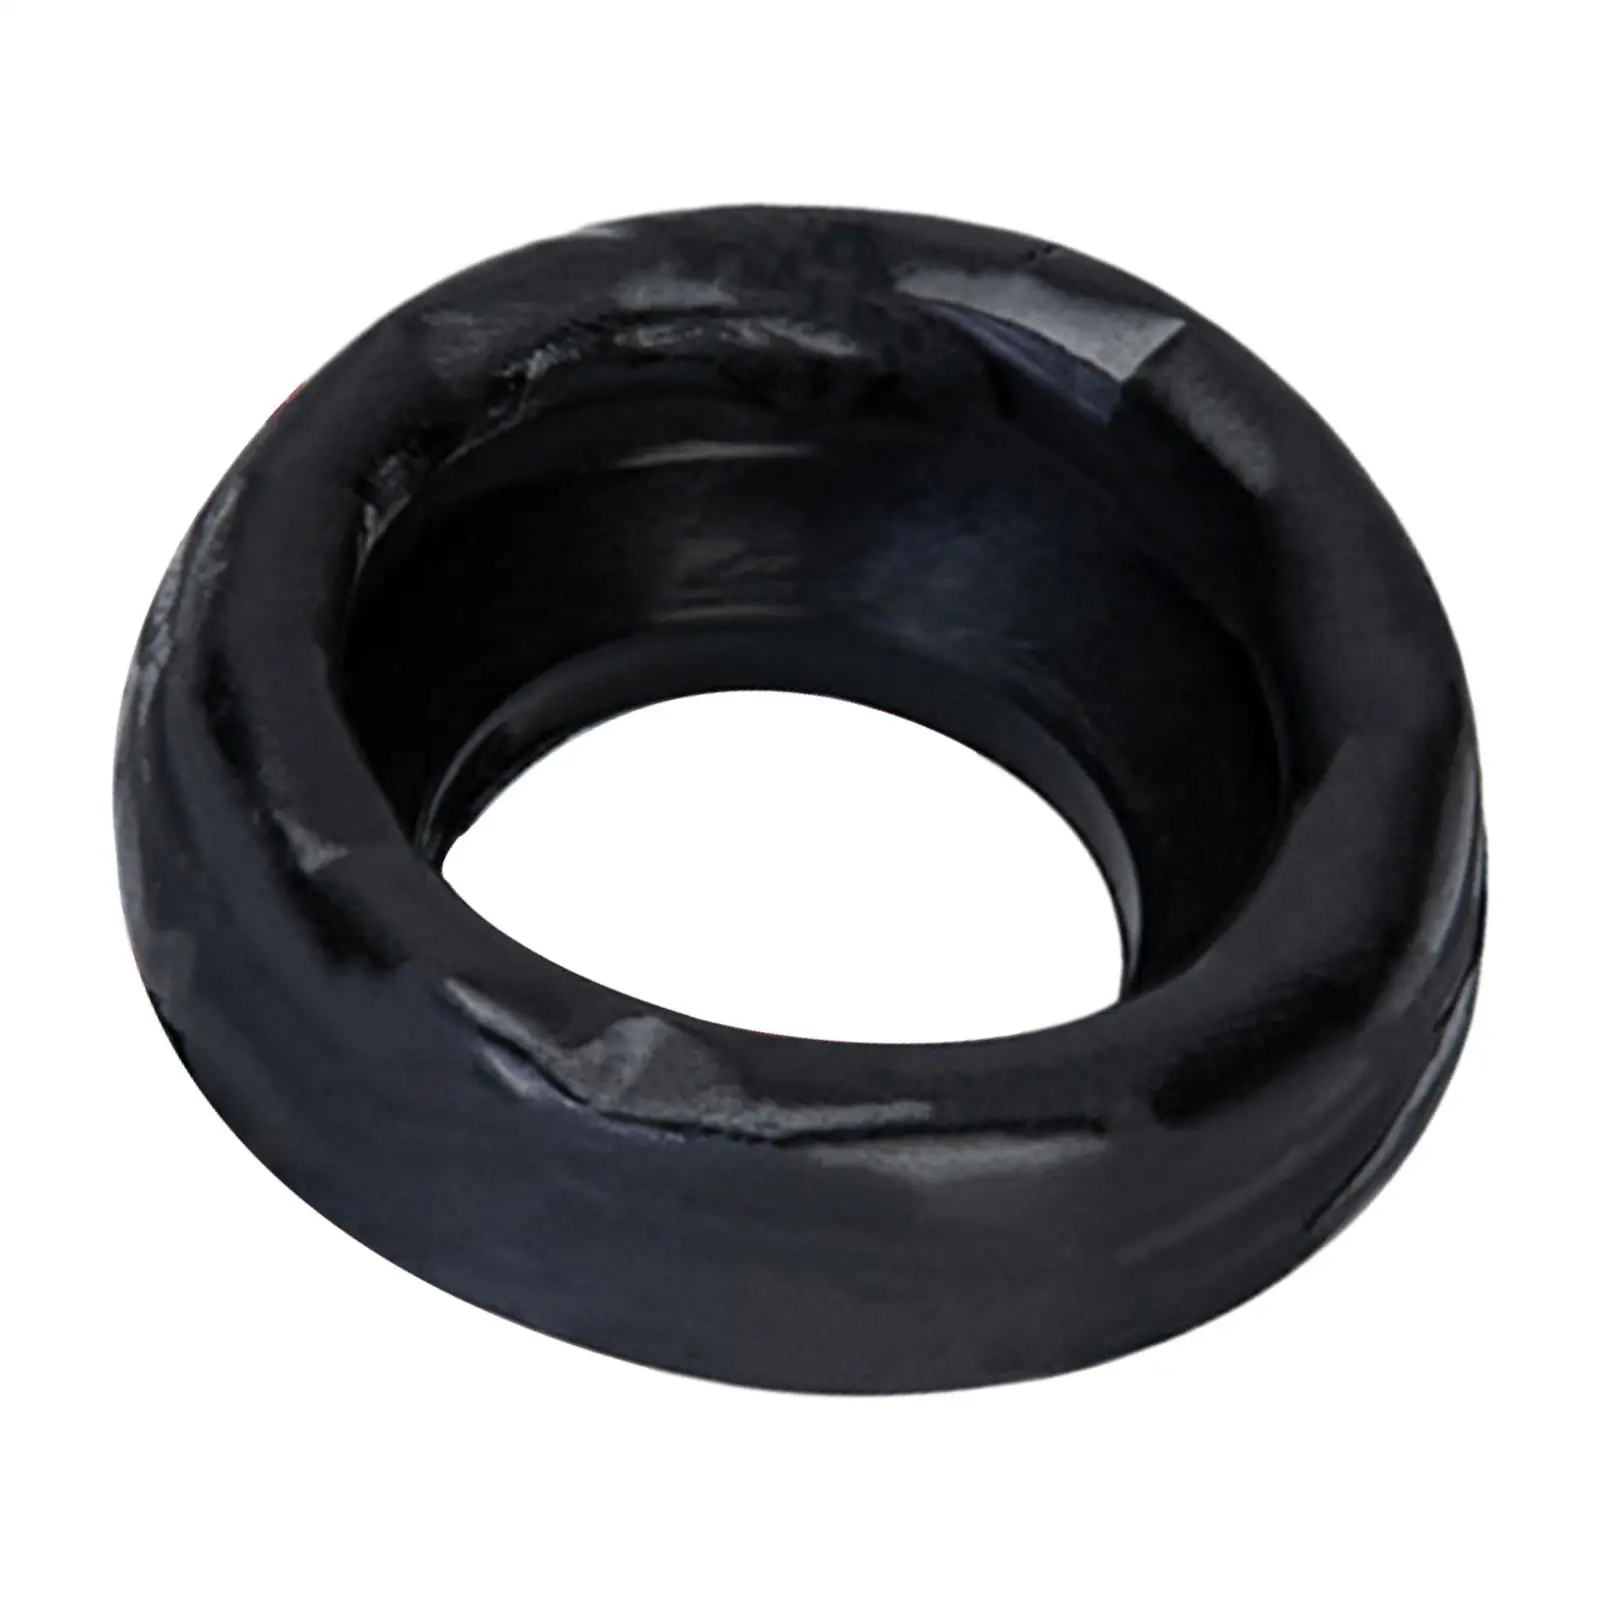 Toilet Bowl Flange Ring Portable Repair Part Accessory Tool Replacement Silicone